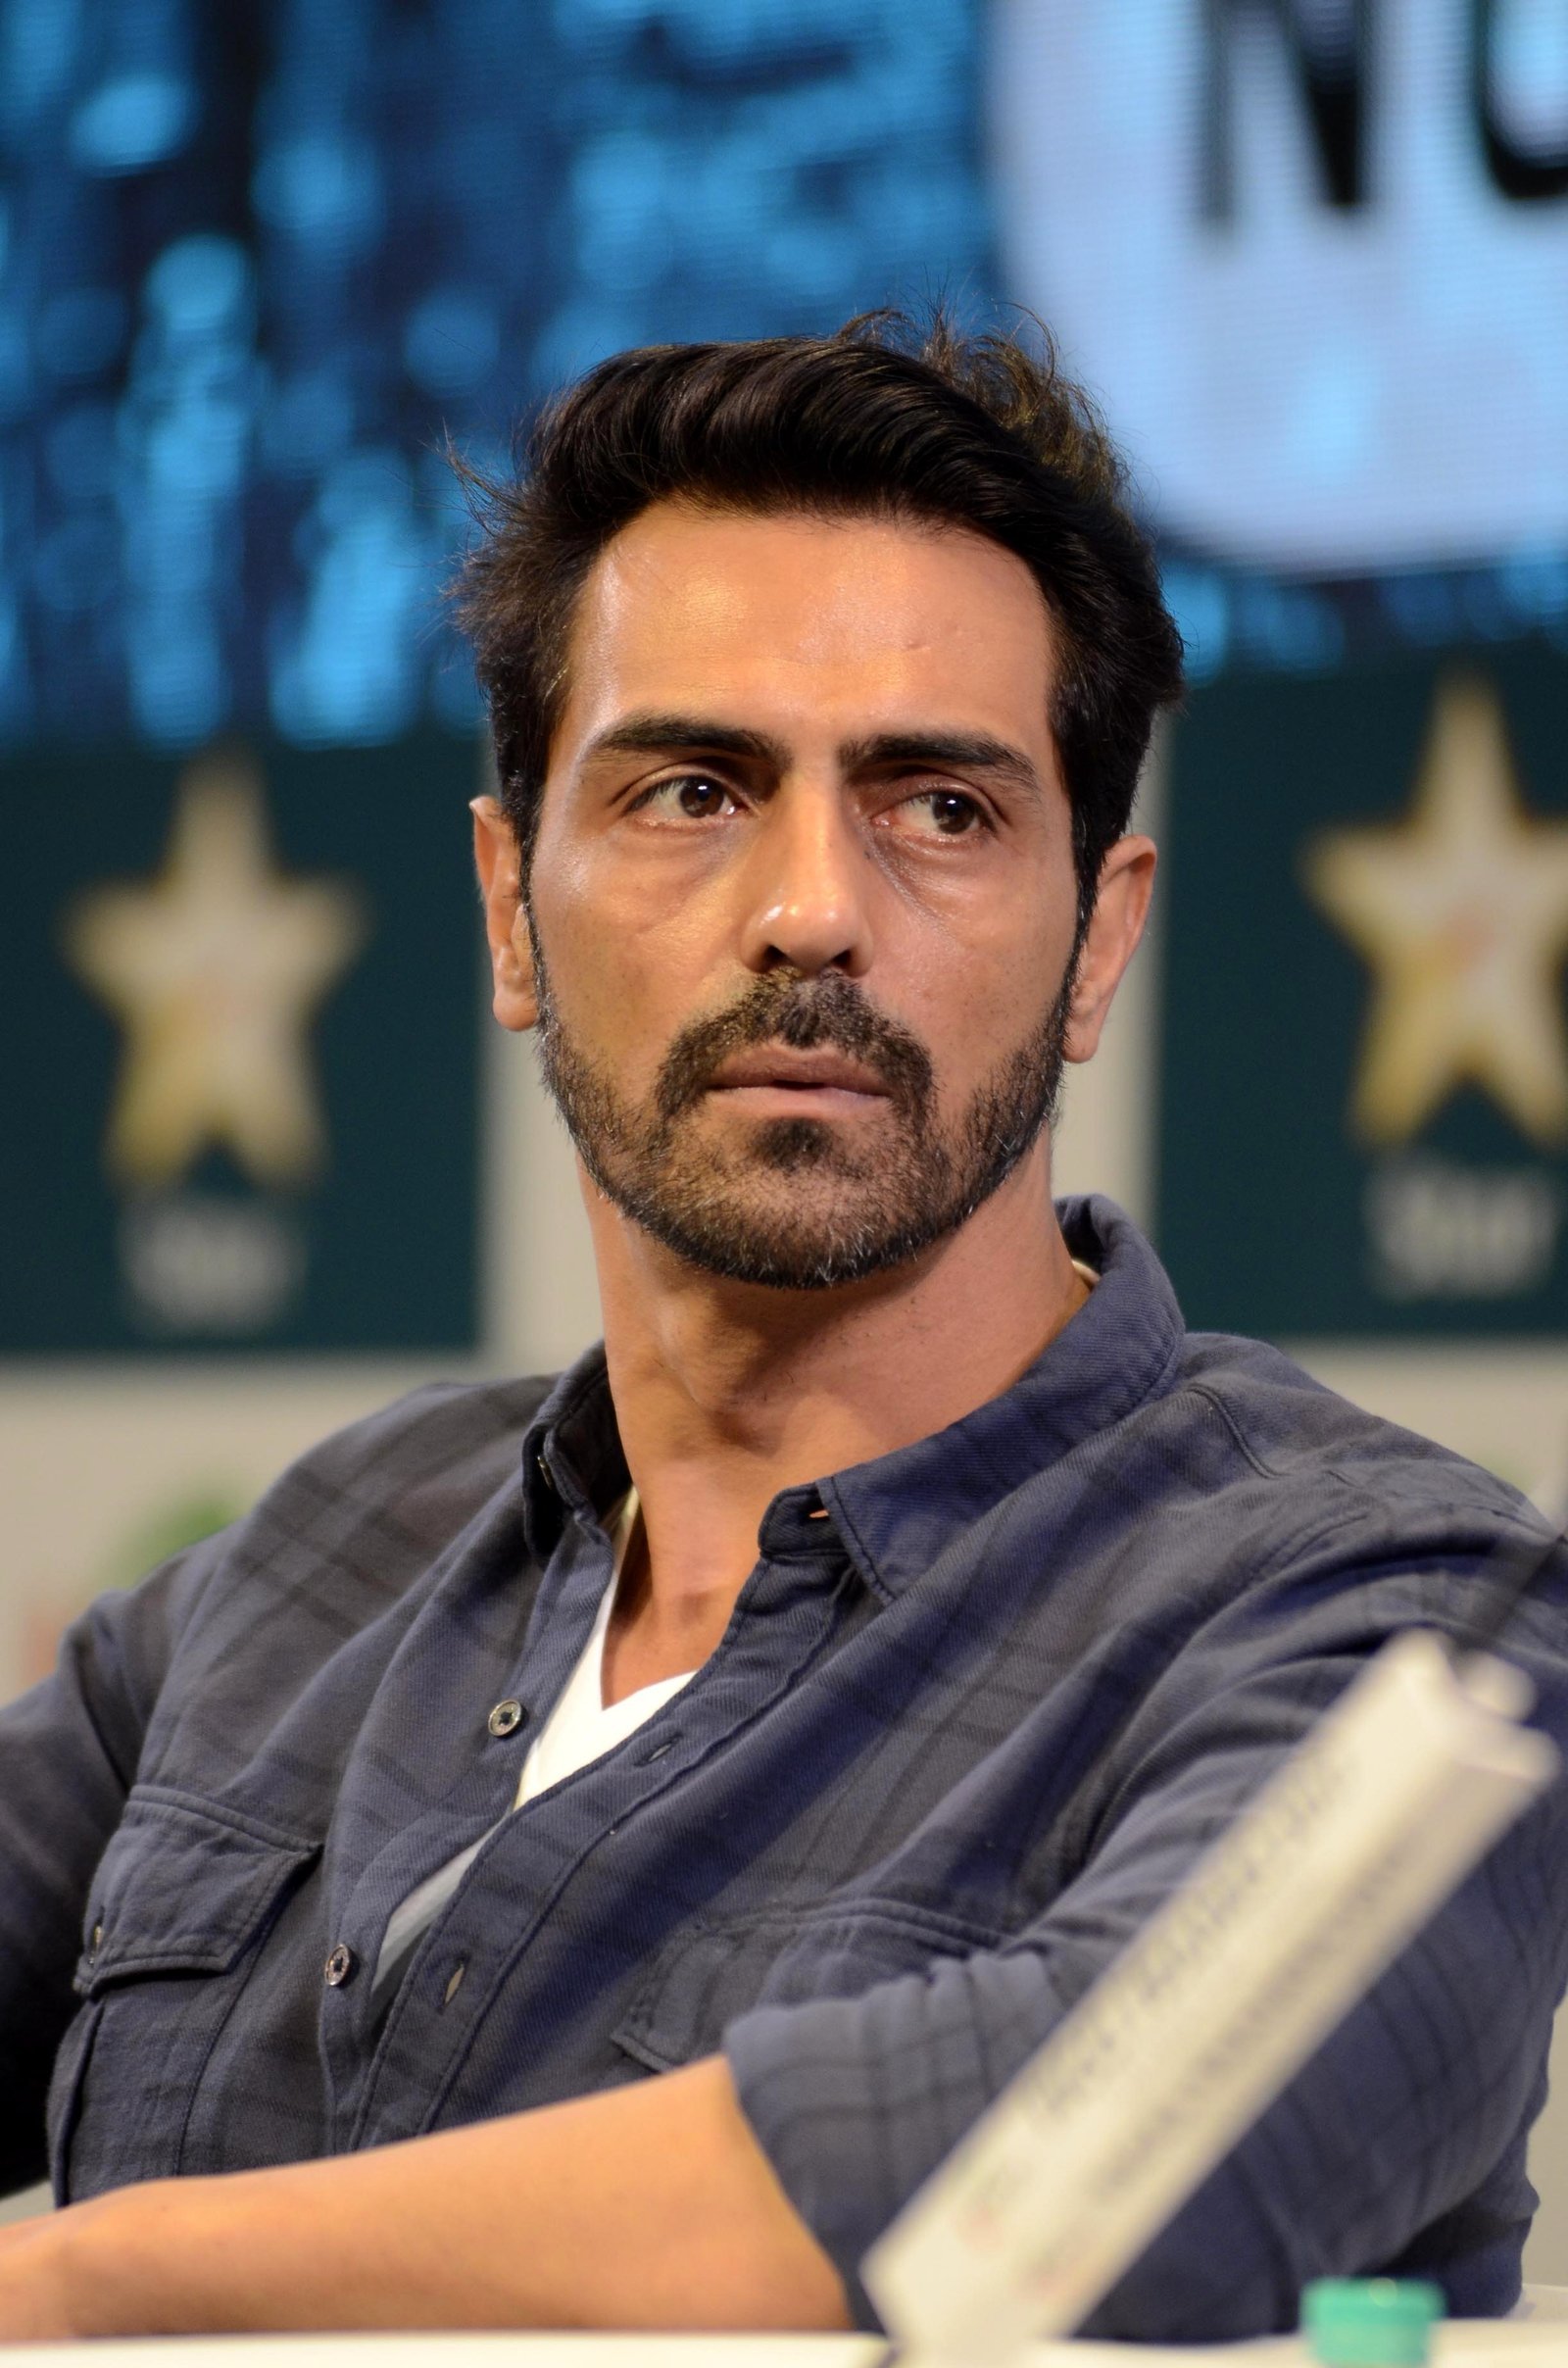 Arjun Rampal at FICCI Event Photos | Picture 1486201